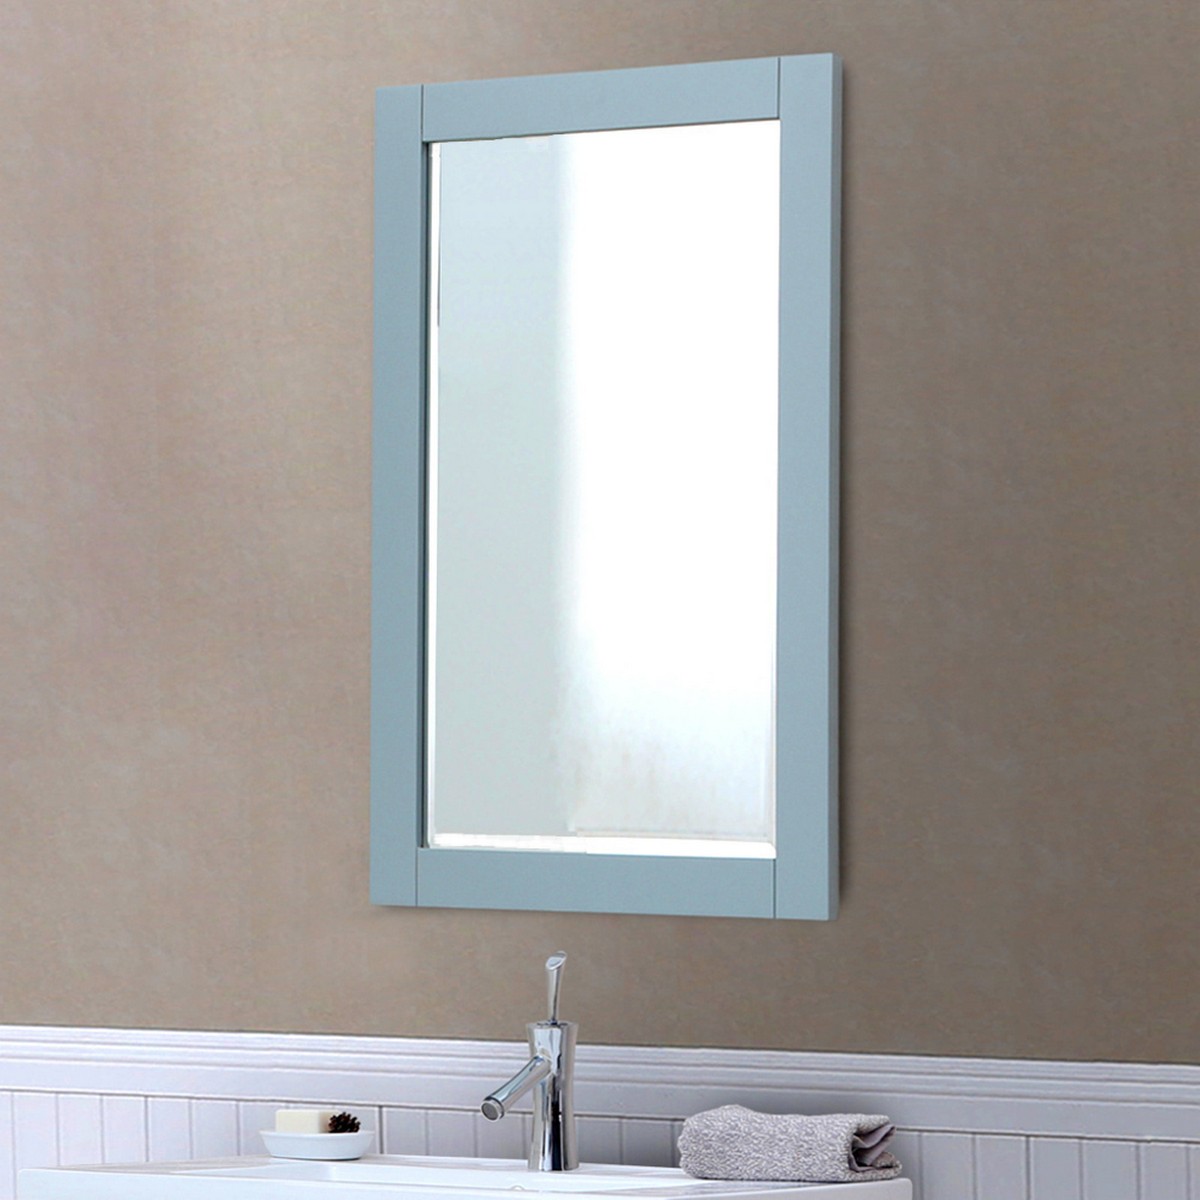 INFURNITURE IN3200-22M-BL 34 x 22 INCH WOOD FRAMED MIRROR IN BLUE